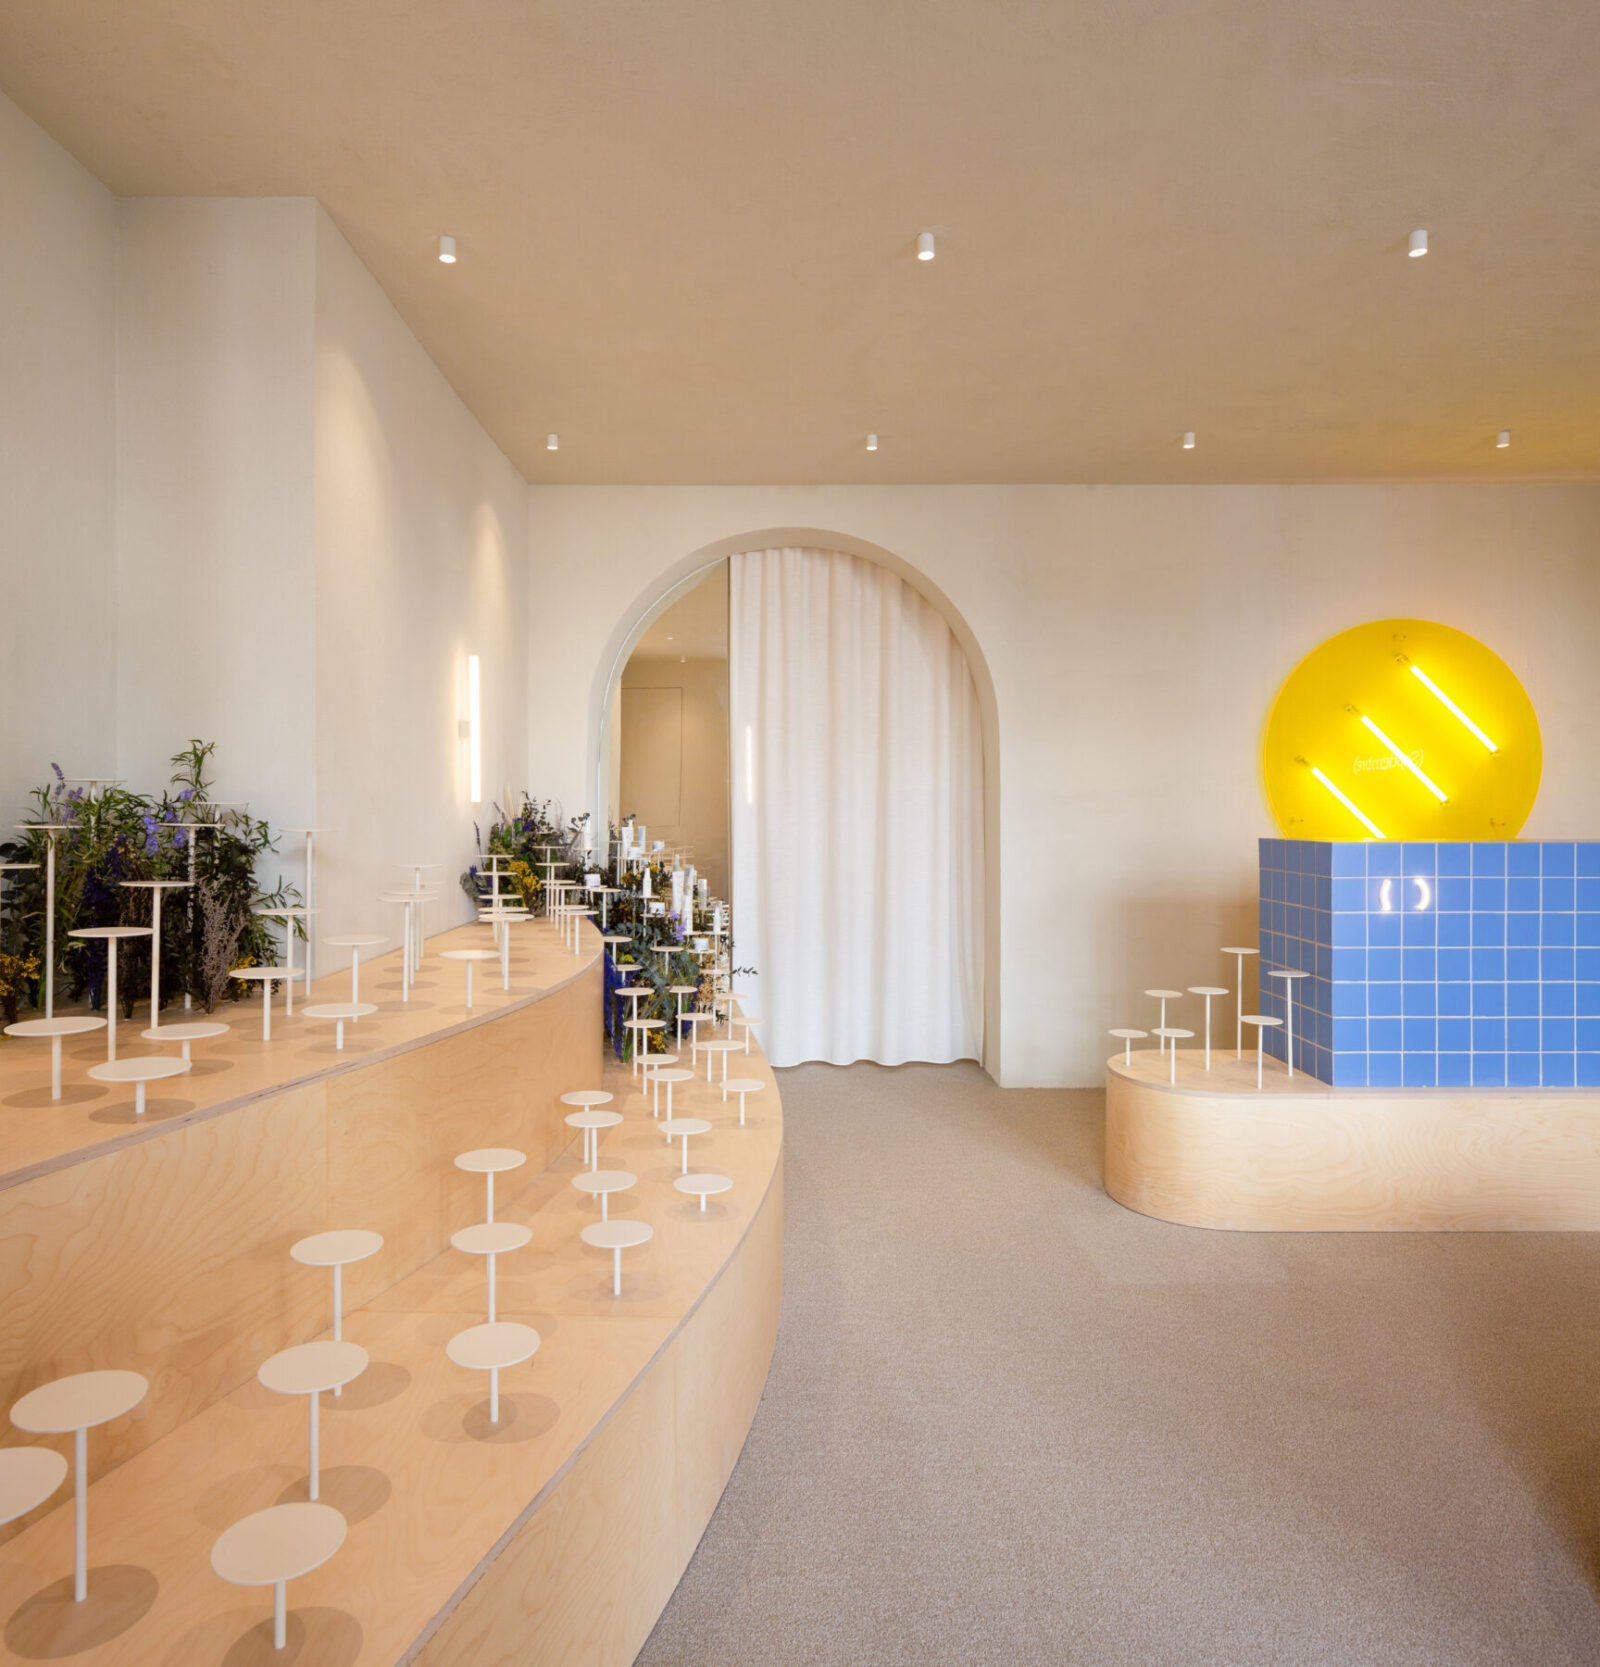 Archisearch Clap Studio recreates an Aster field with real and conceptual flowers at the interior of Septiembre Clinic